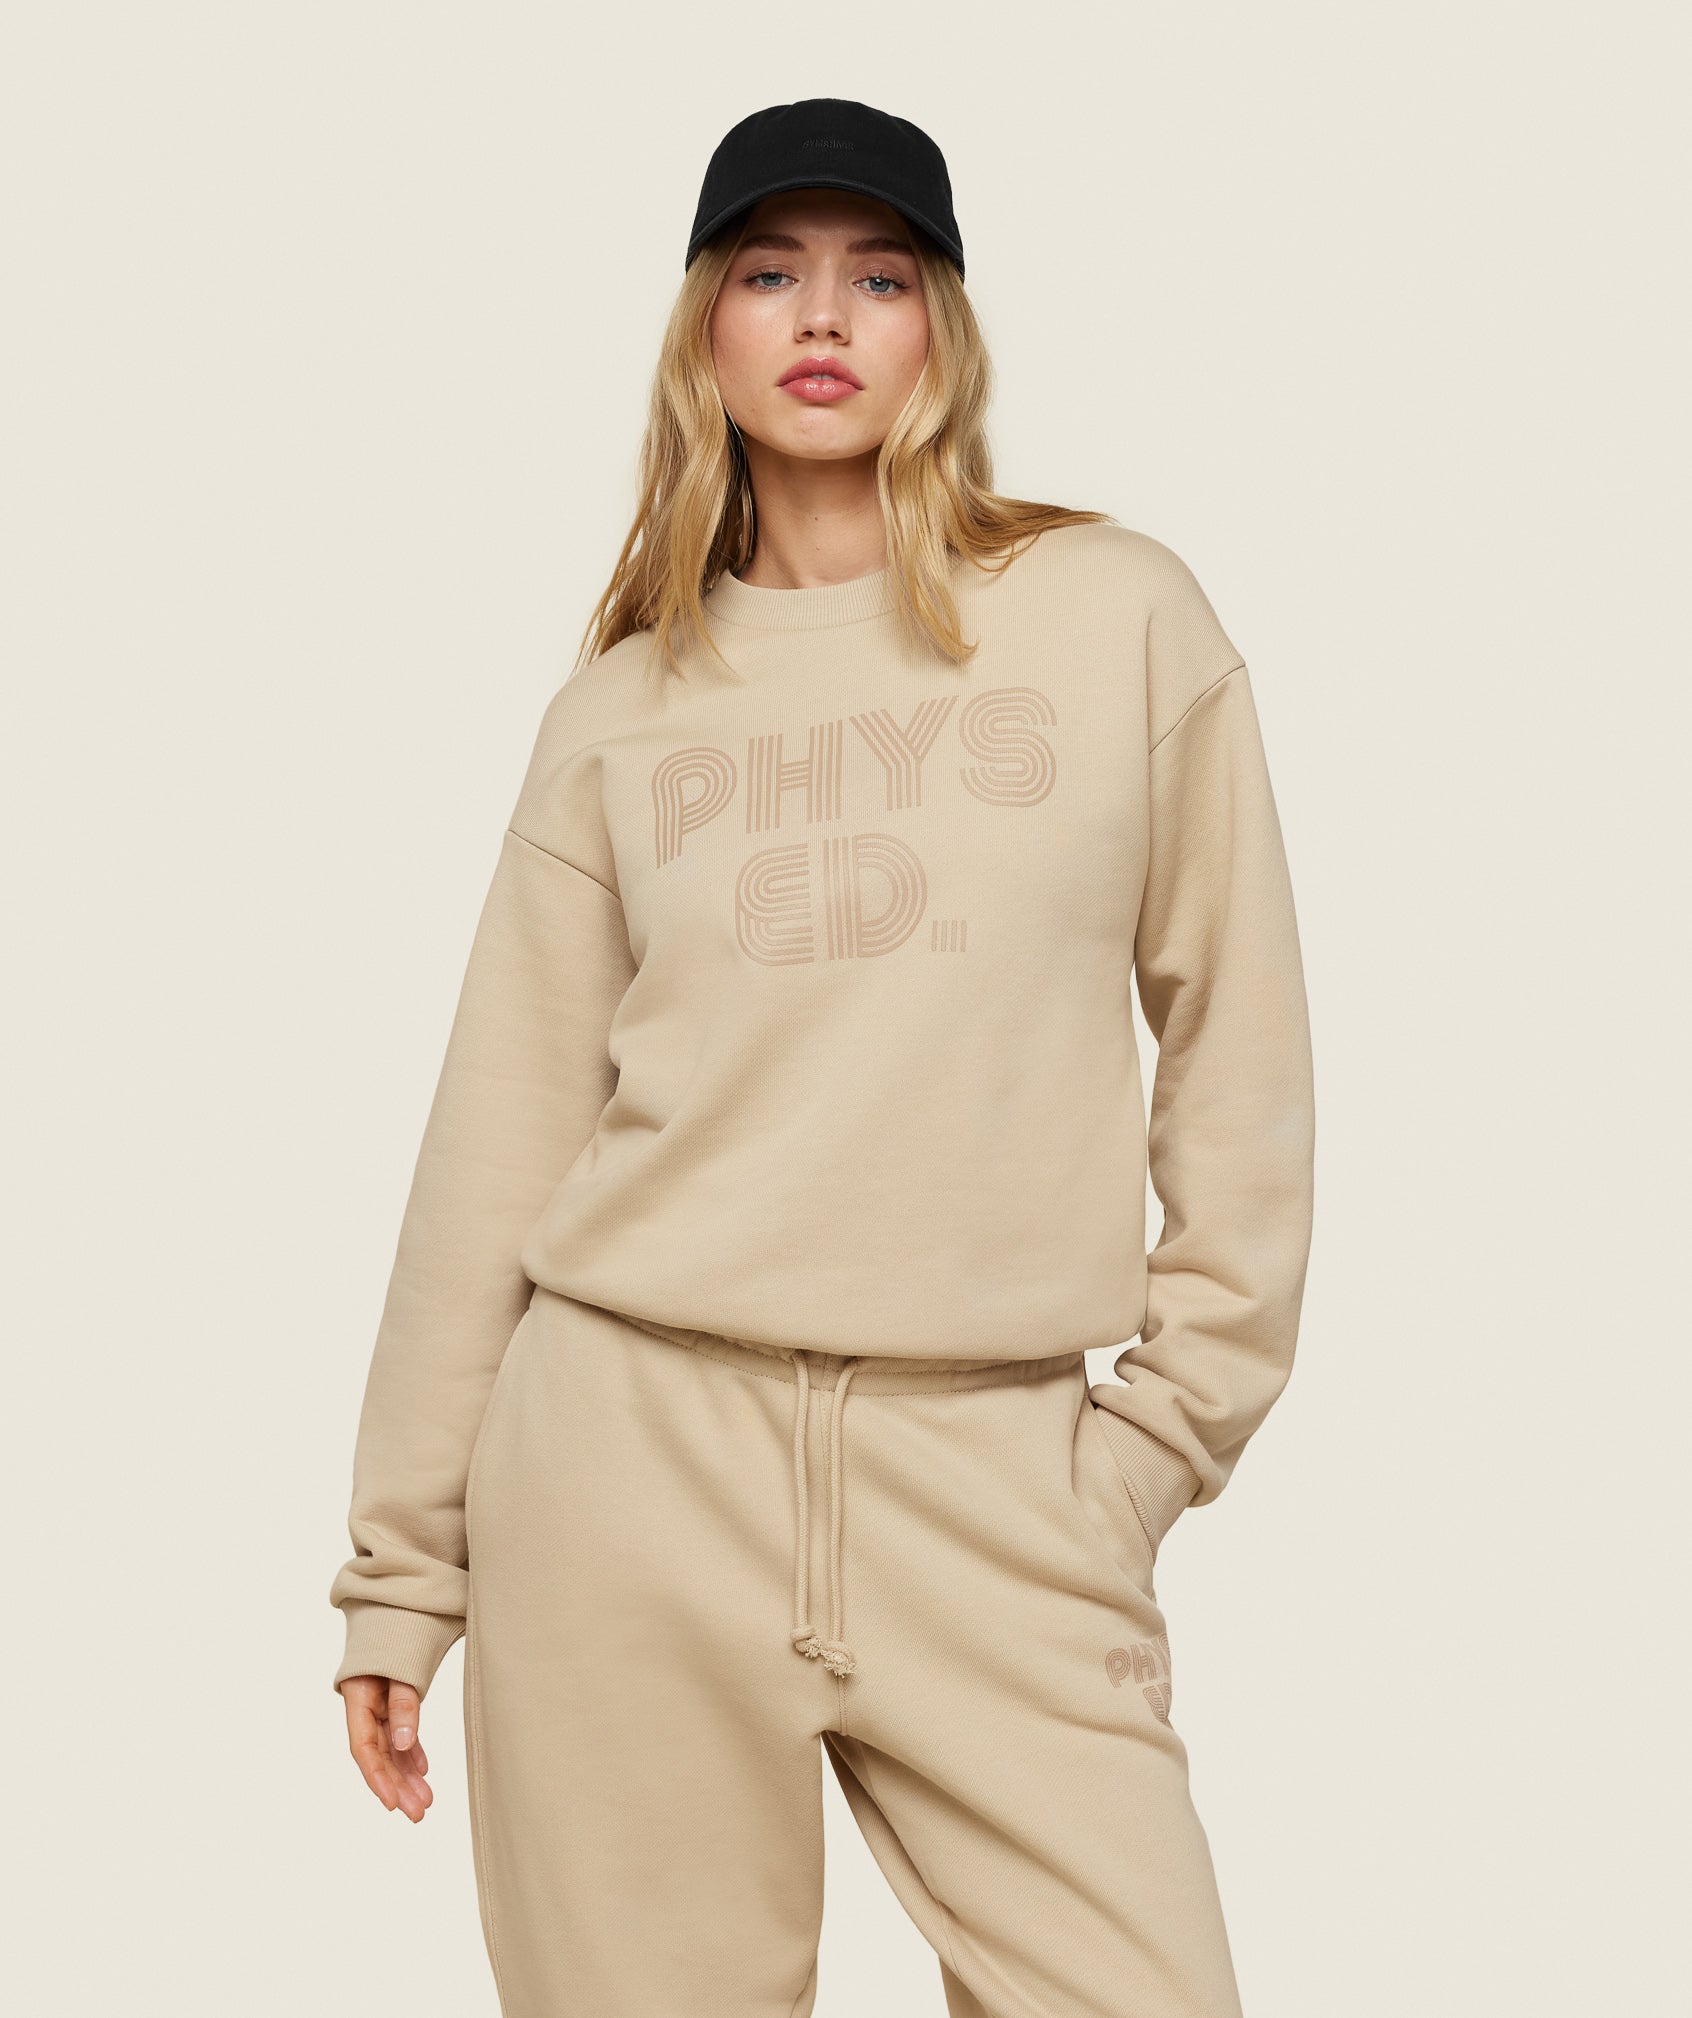 Phys Ed Graphics Relaxed Sweatshirt